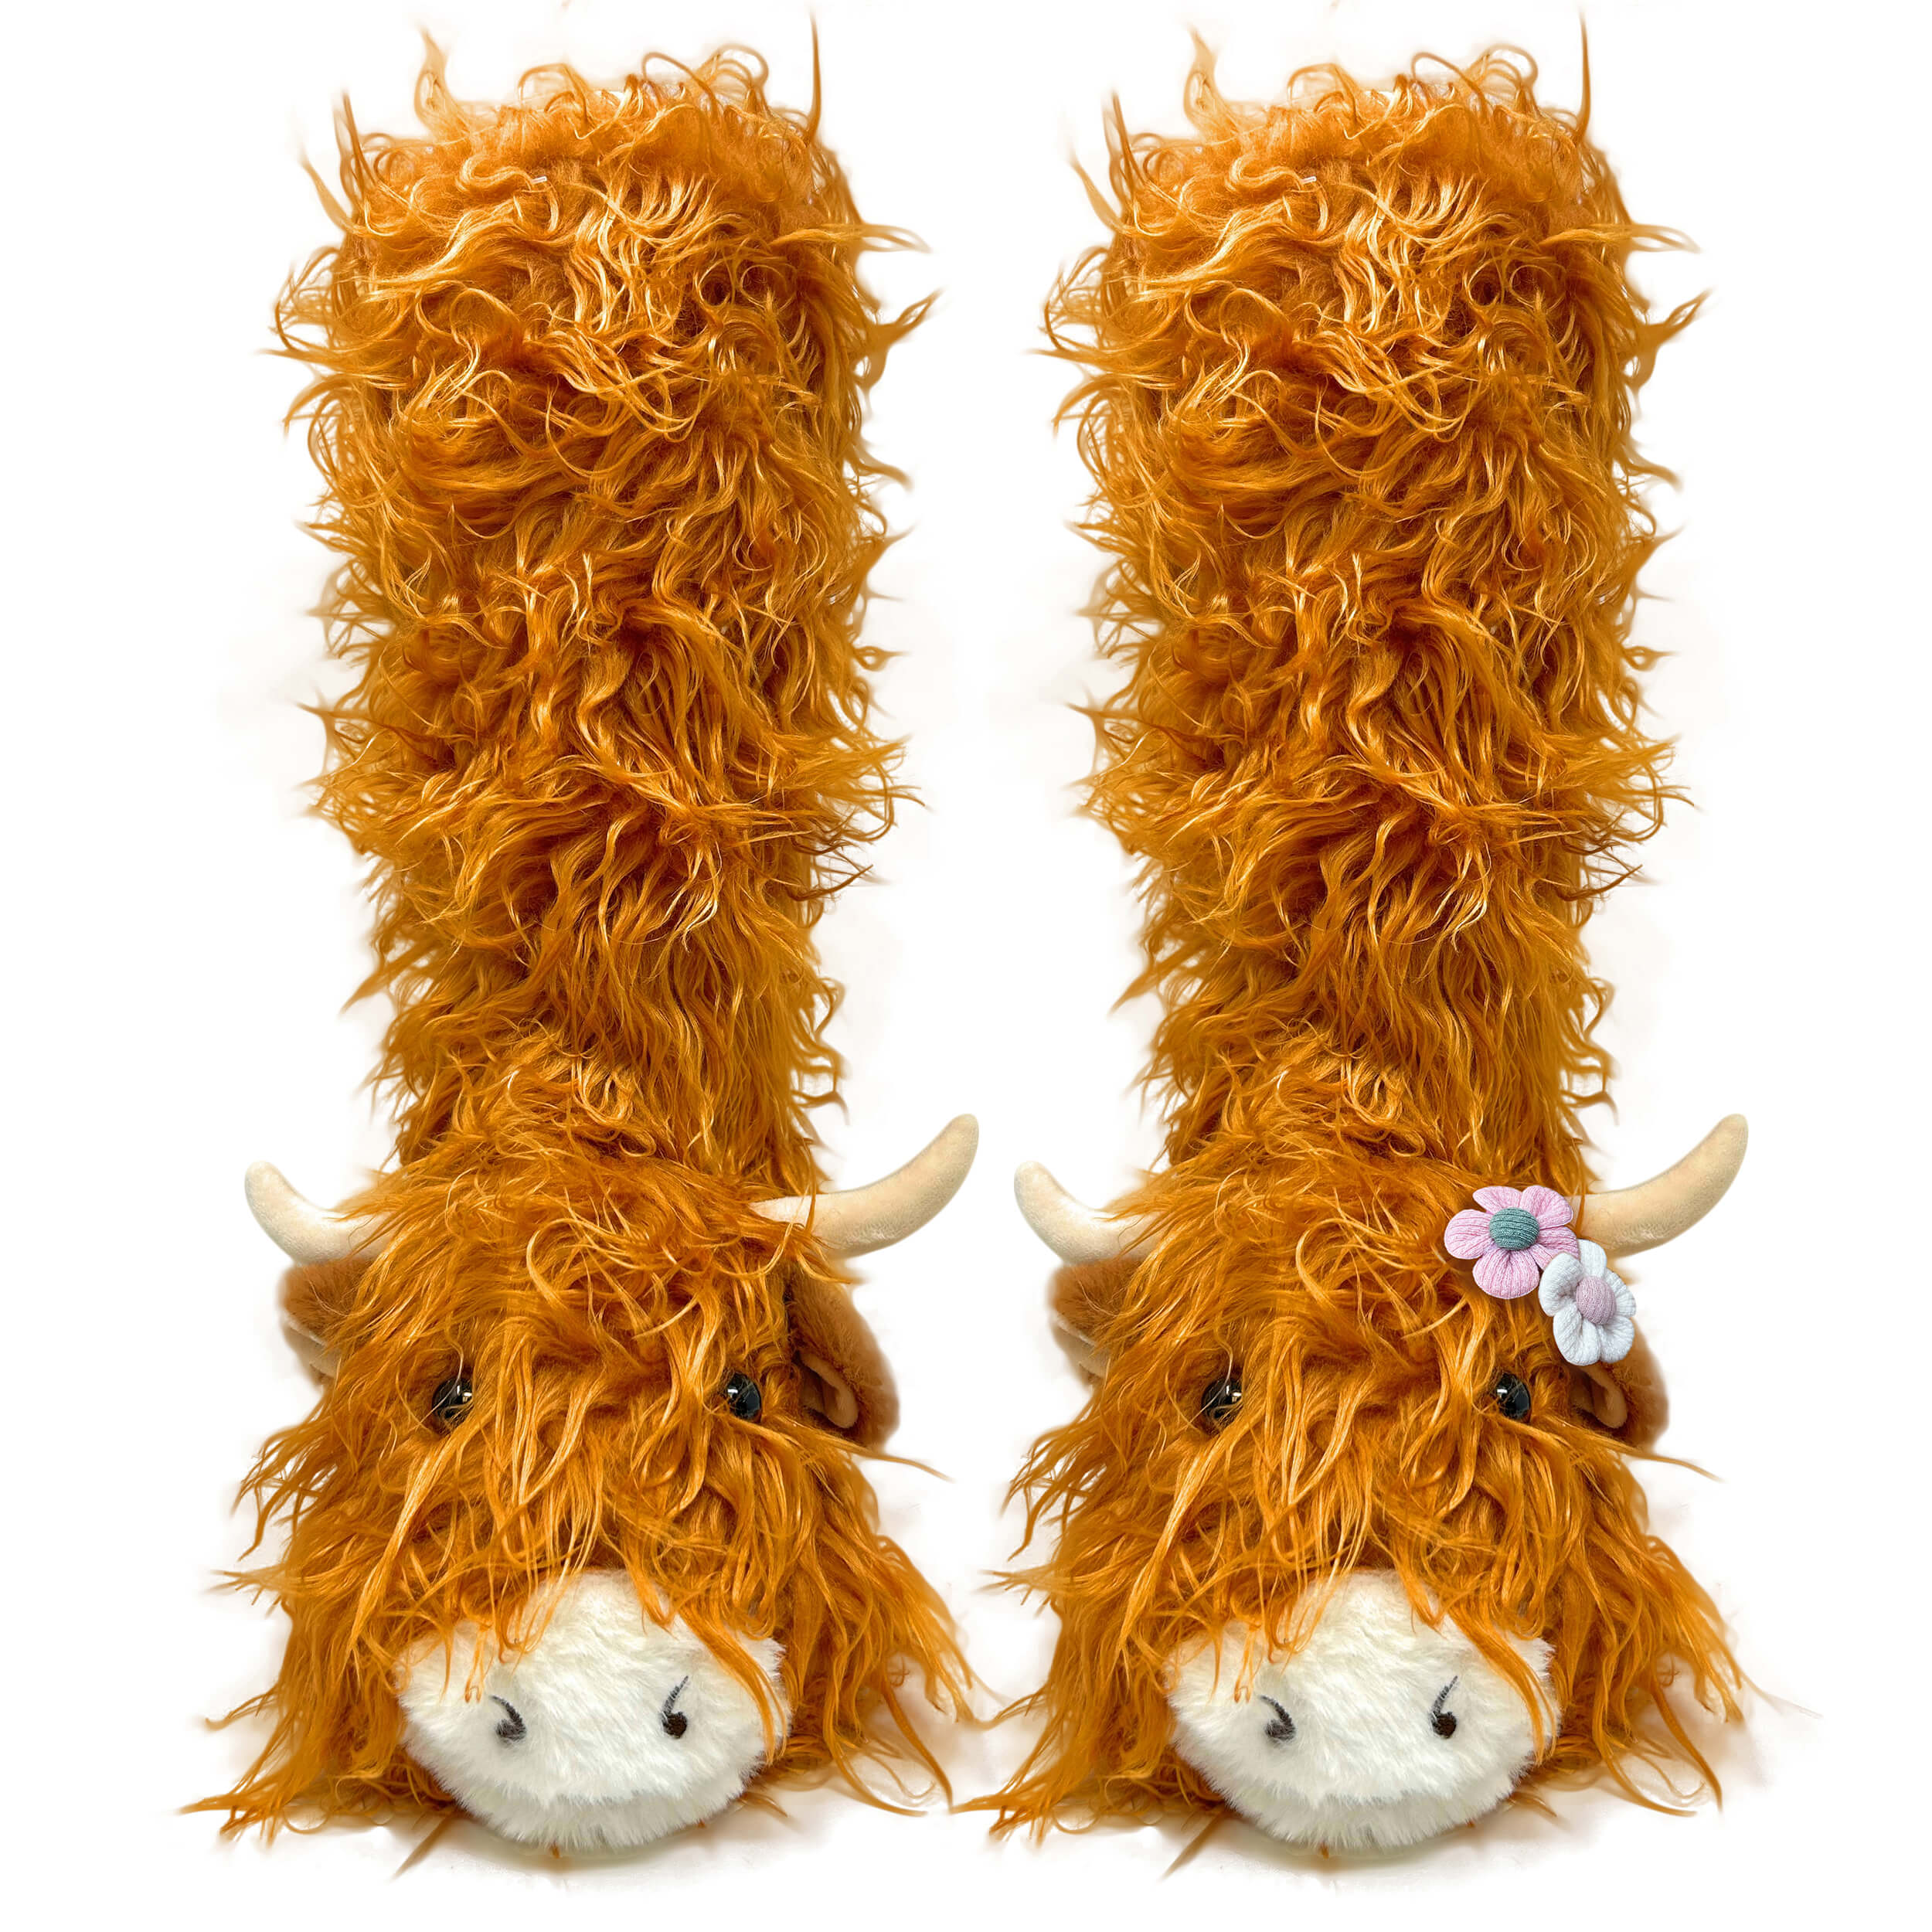 Slippers Plush Shaggy Highland Cow Indoor Shoes Slip On Warm Ladies Gift US  9.5 | eBay